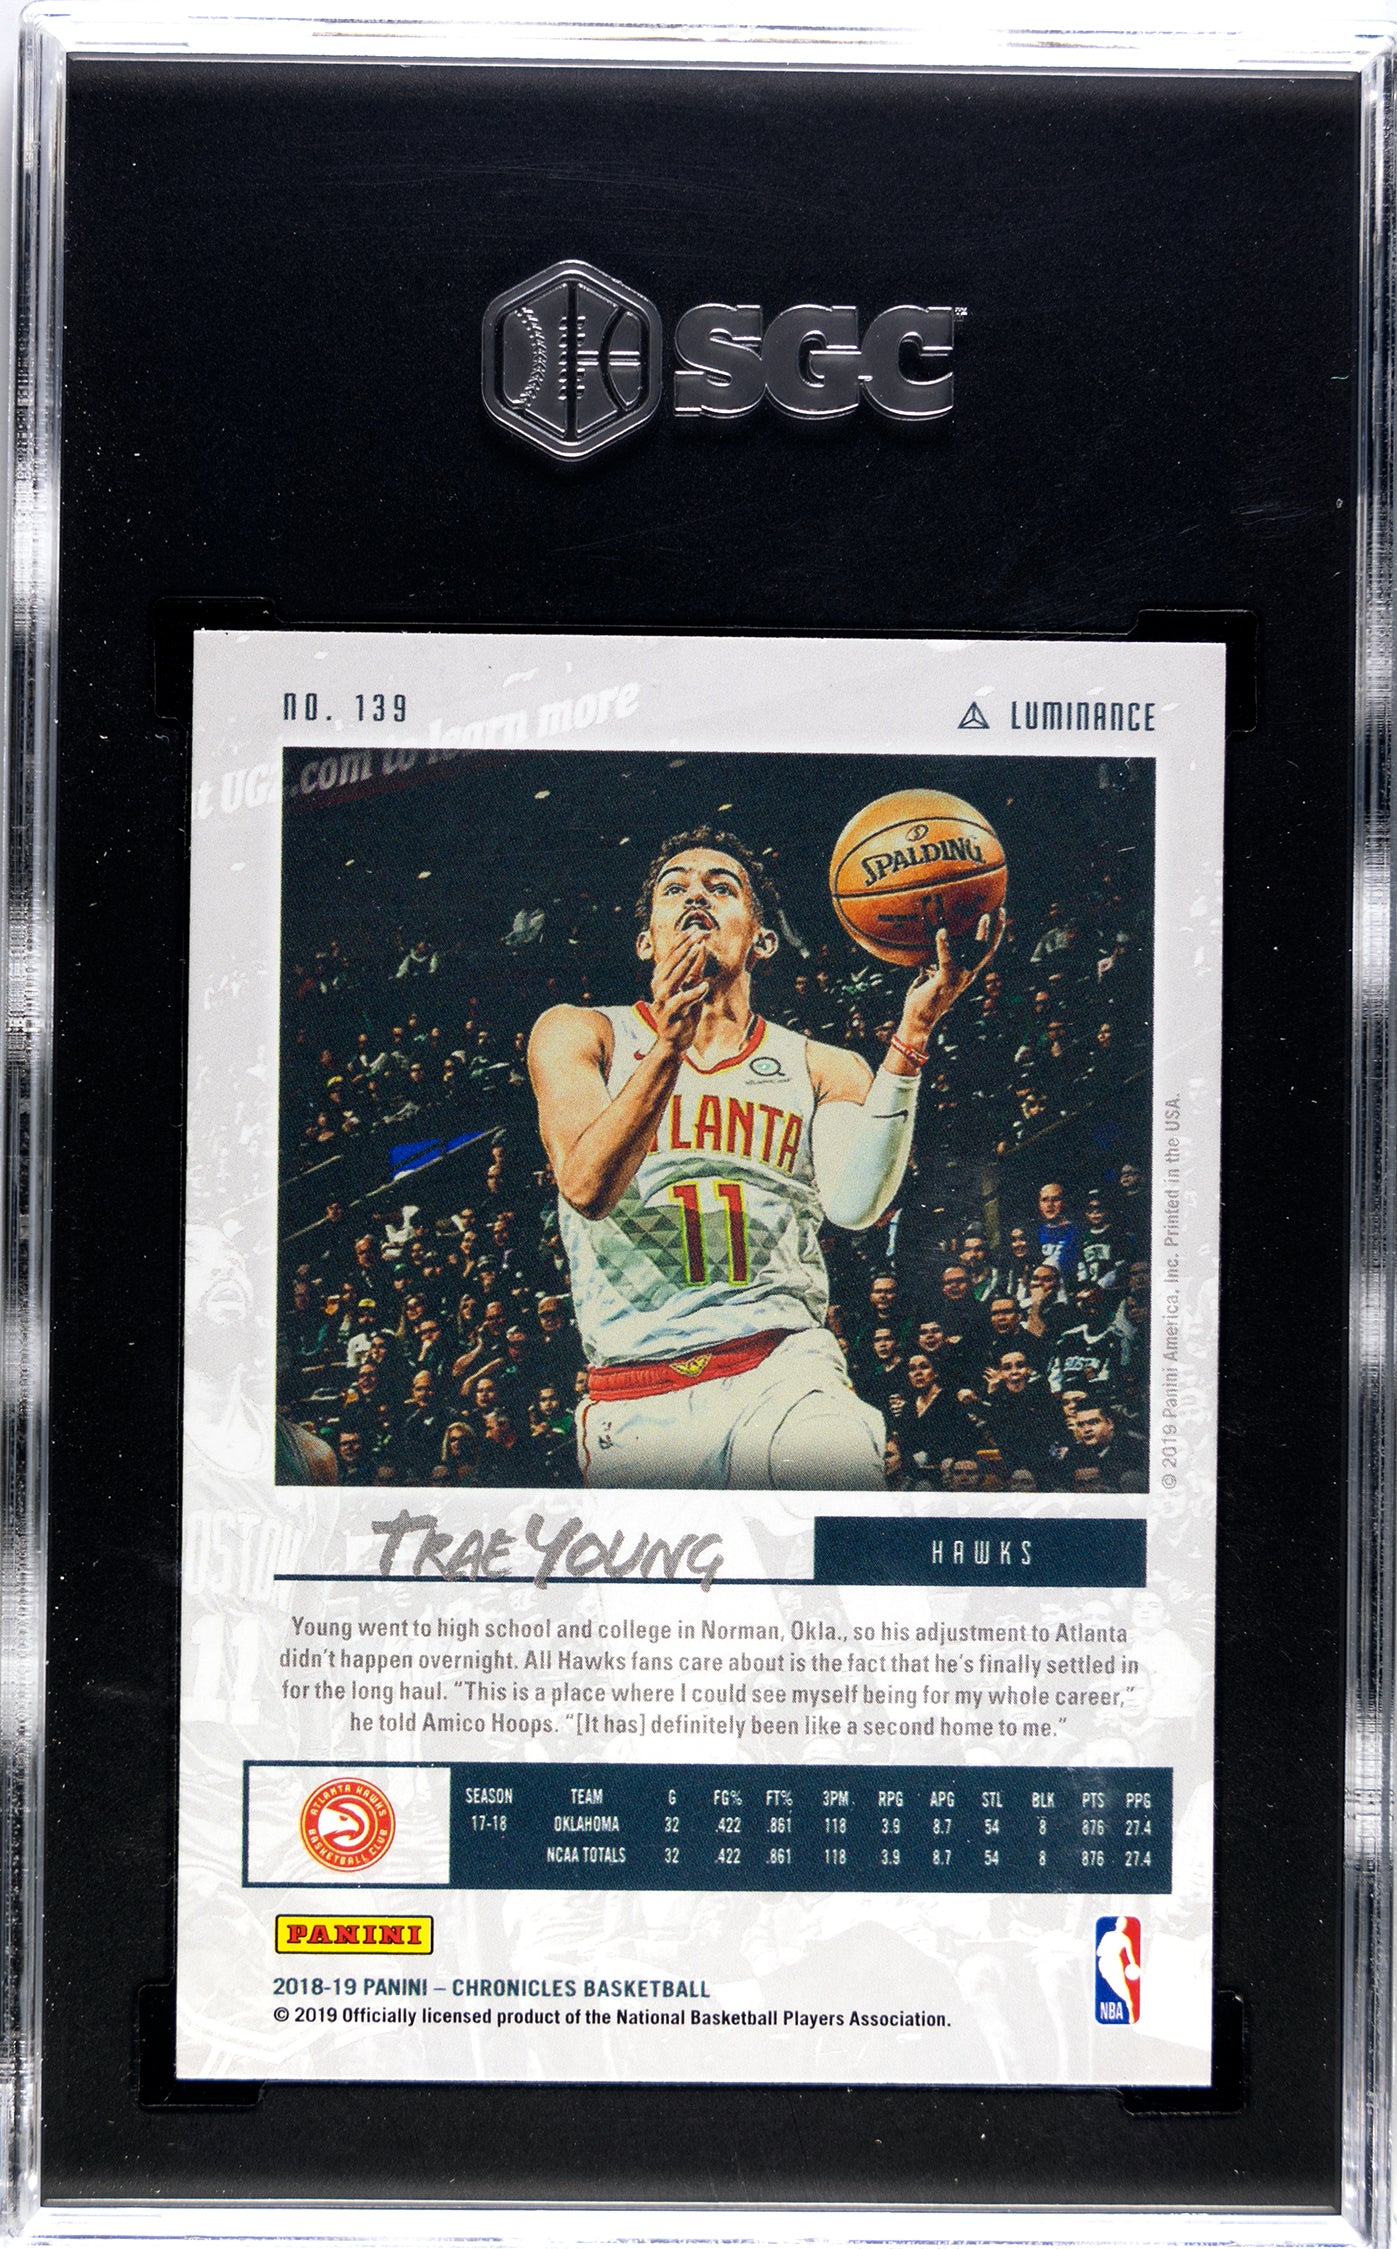 SGC 9.5 Trae Young Liminance Rookie #139